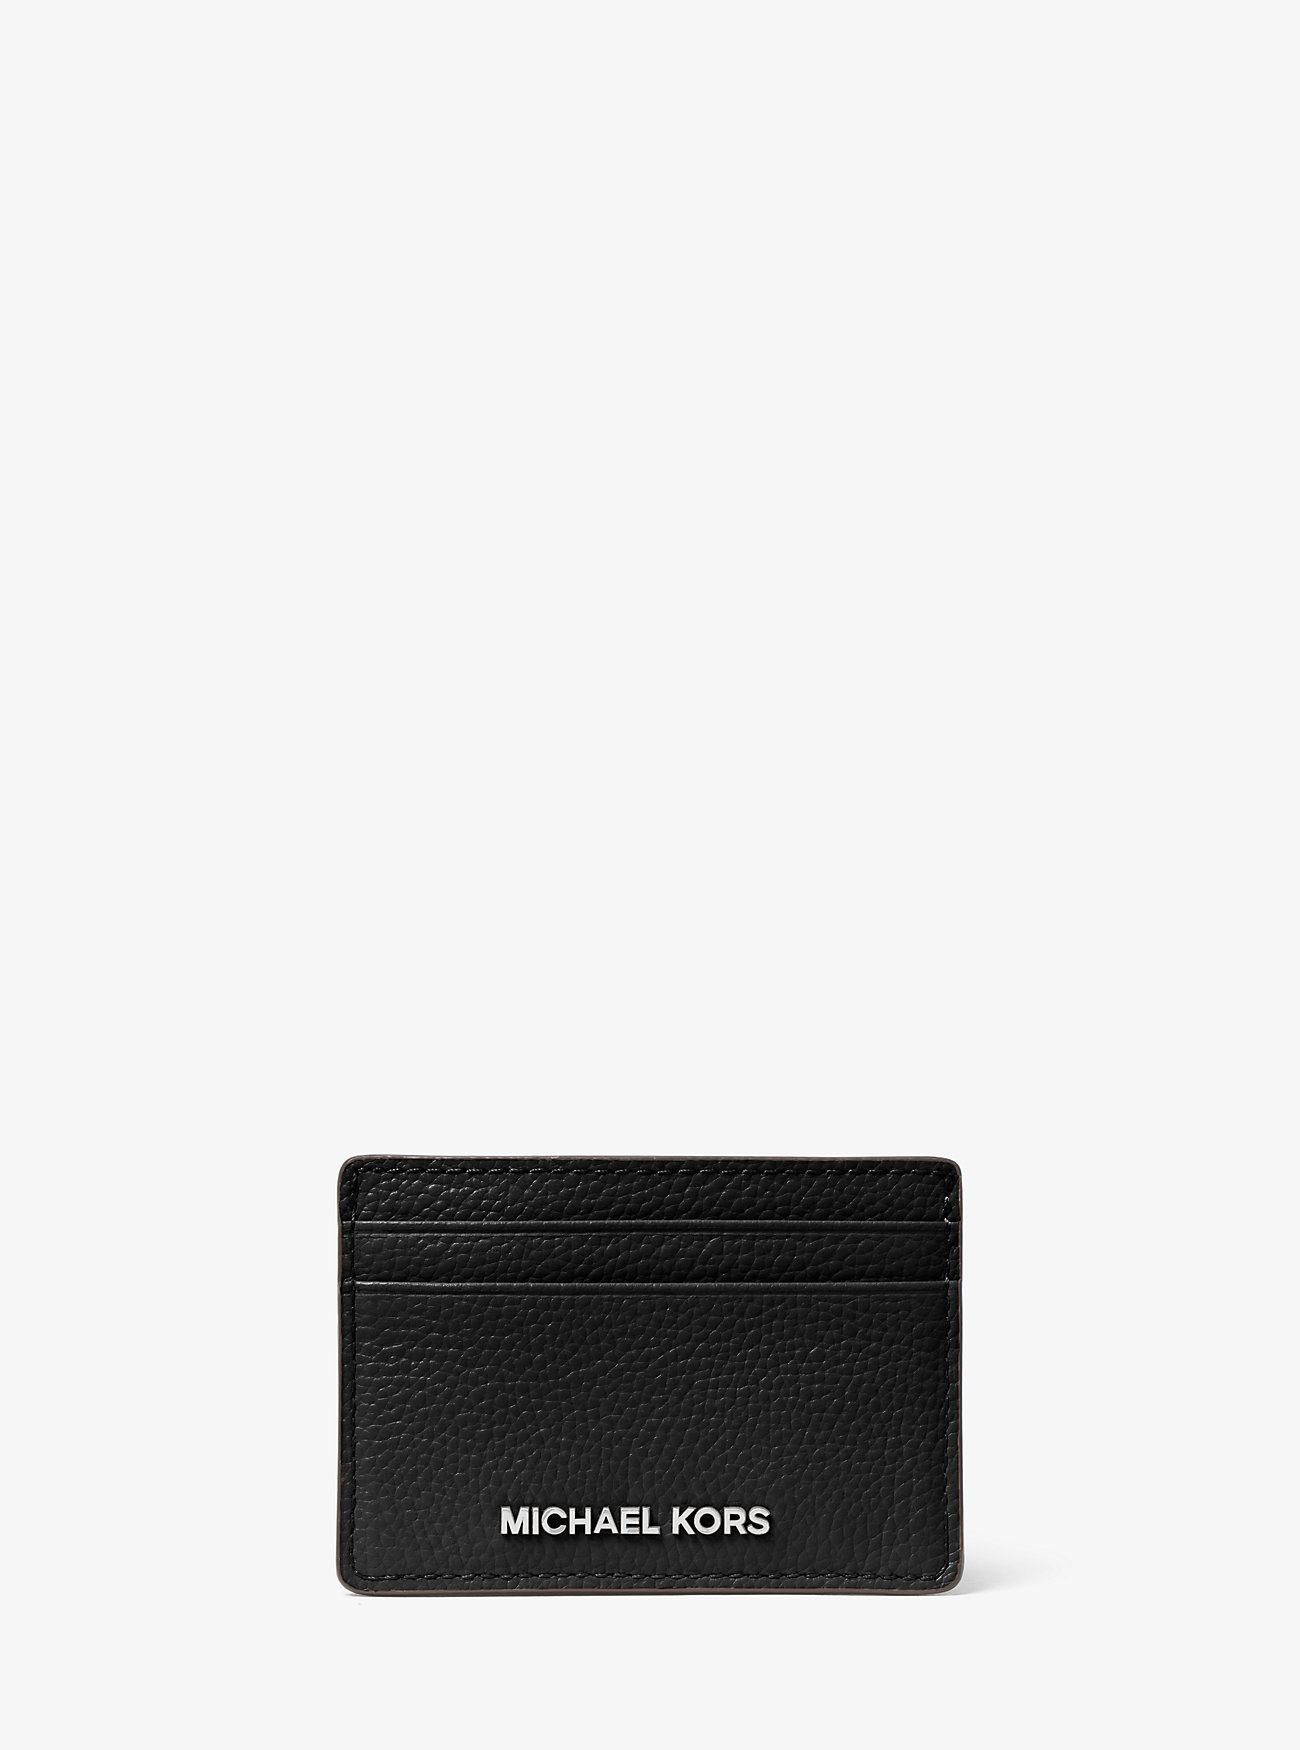 Michaelkors Pebbled Leather Card Case